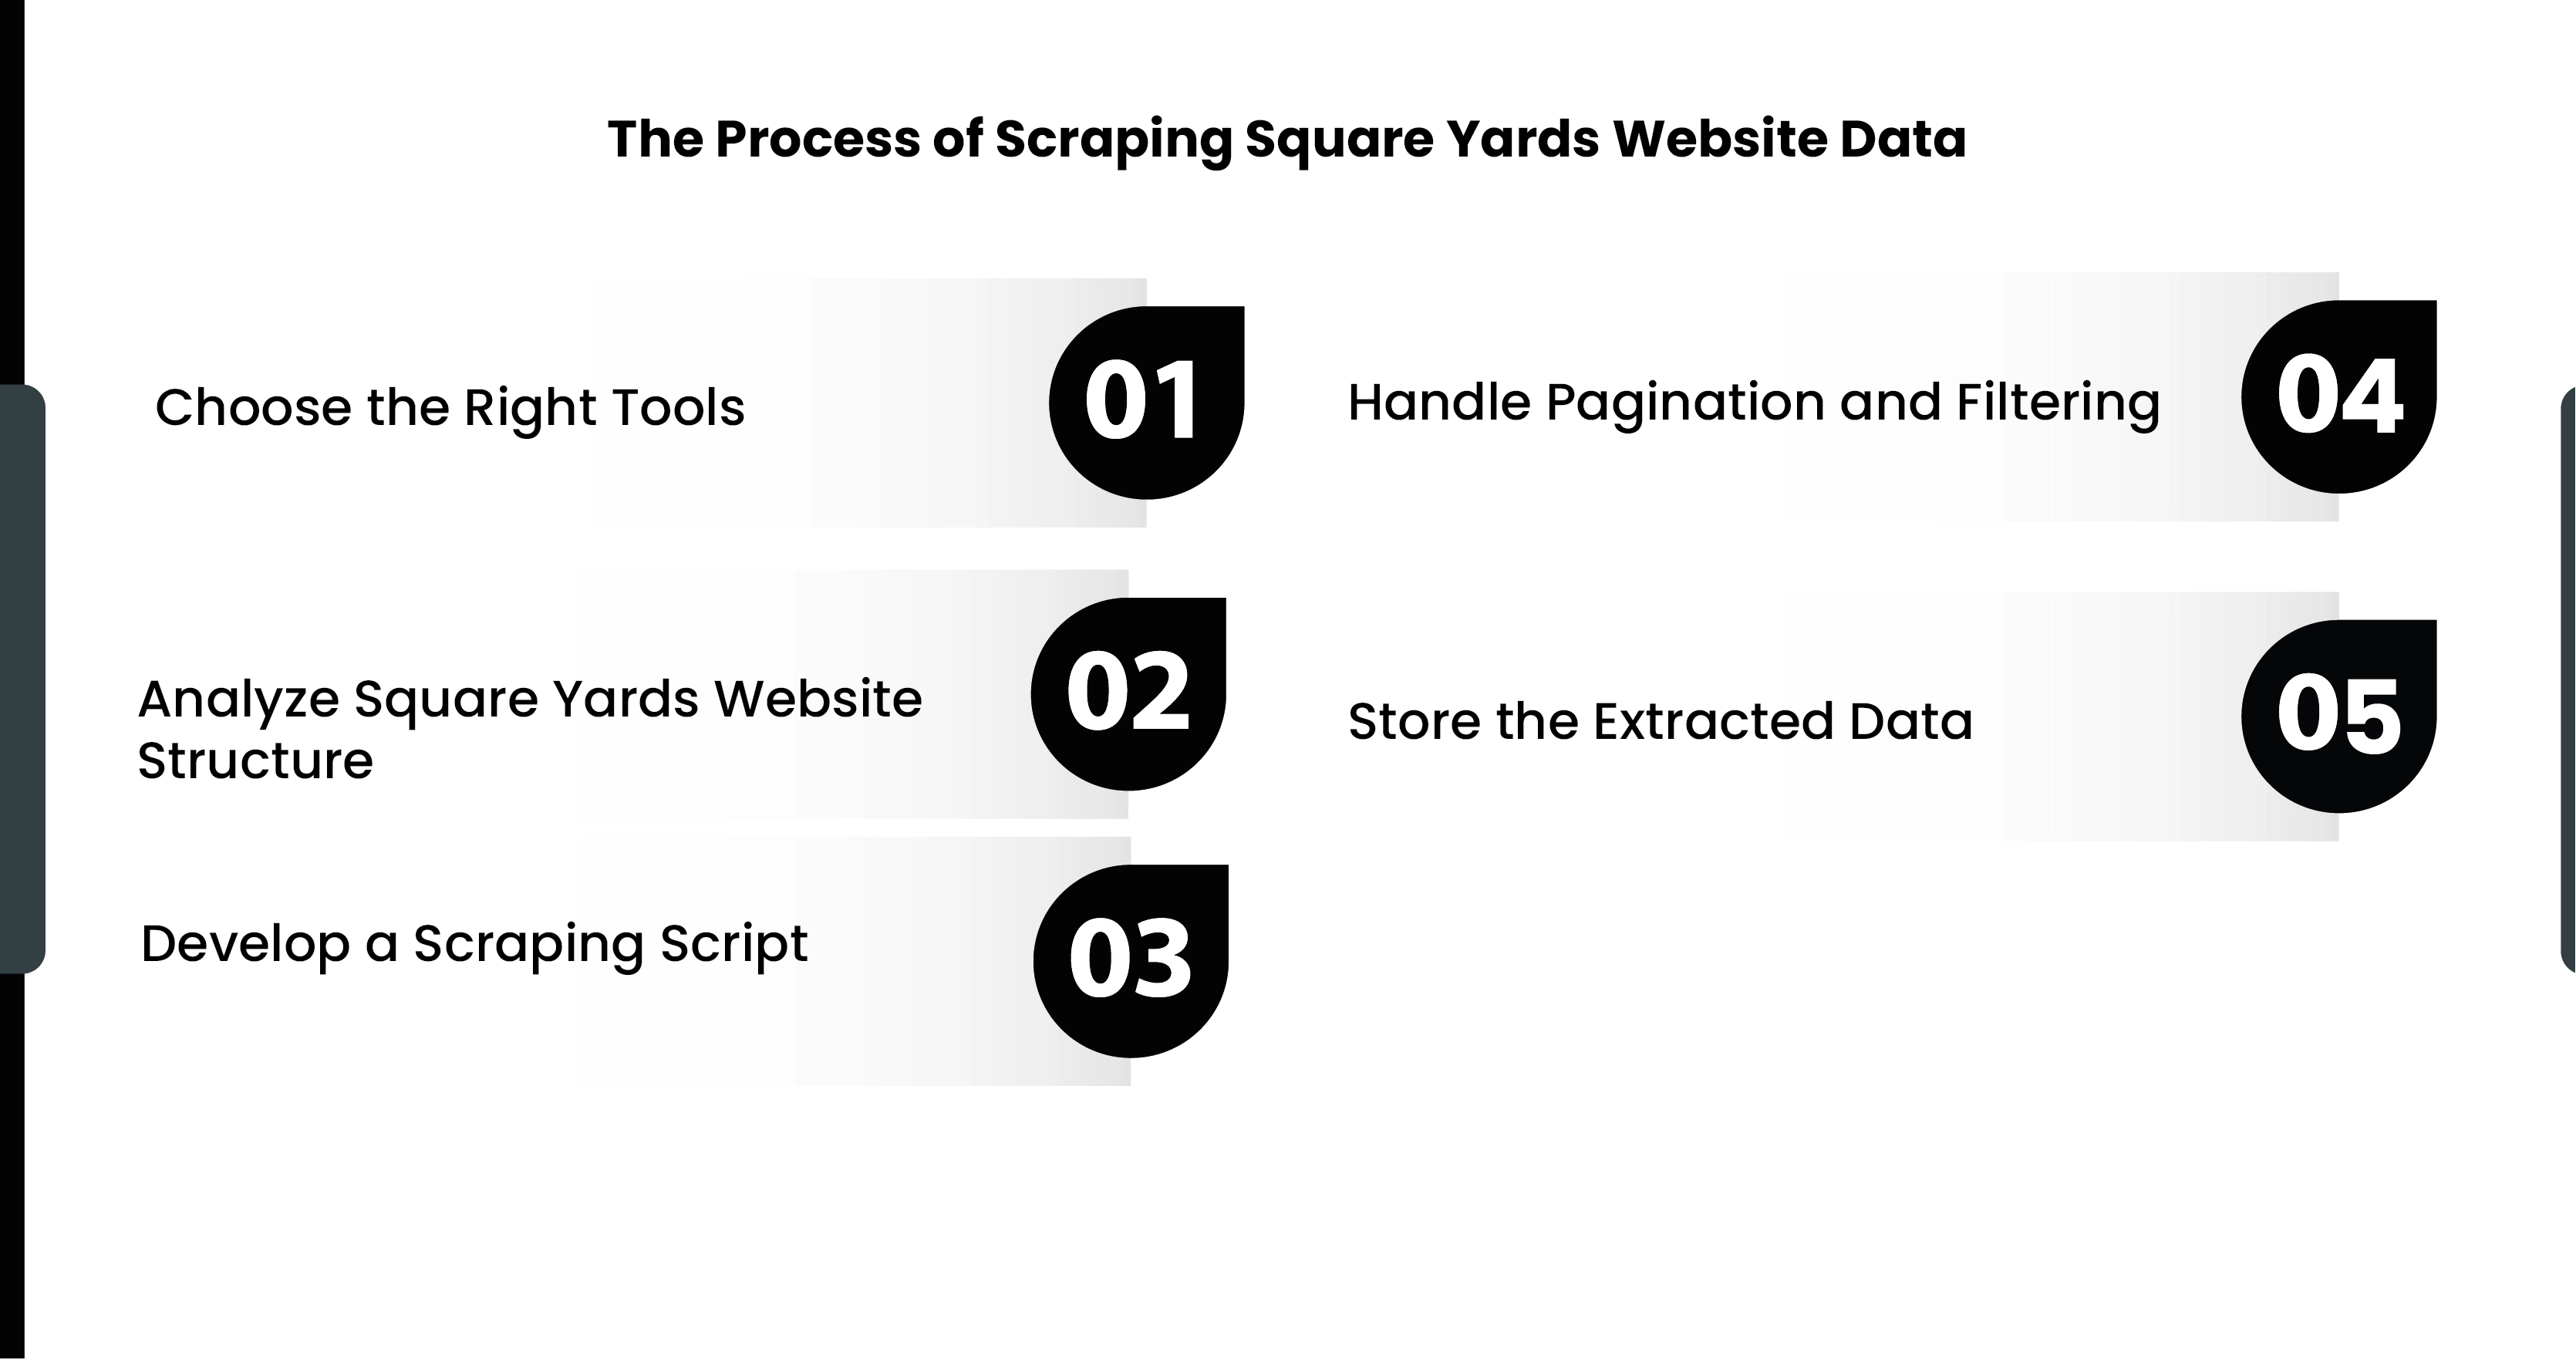 The Process of Scraping Square Yards Website Data